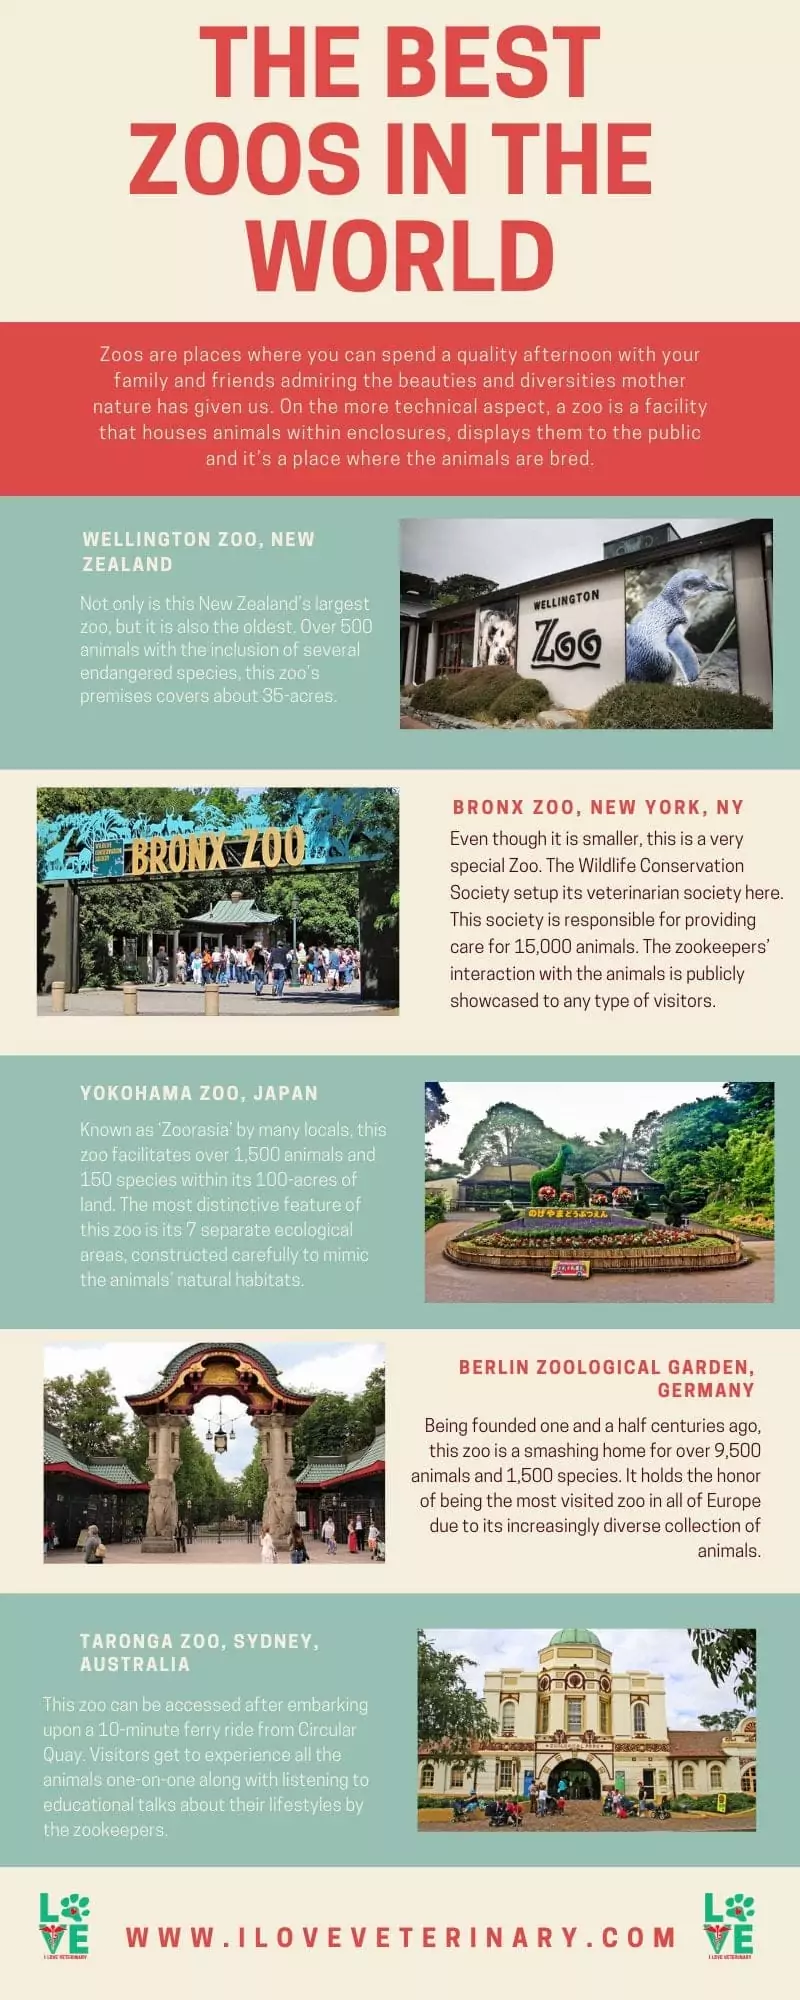 the top 5 zoos in the world I Love Veterinary - Blog for Veterinarians, Vet Techs, Students